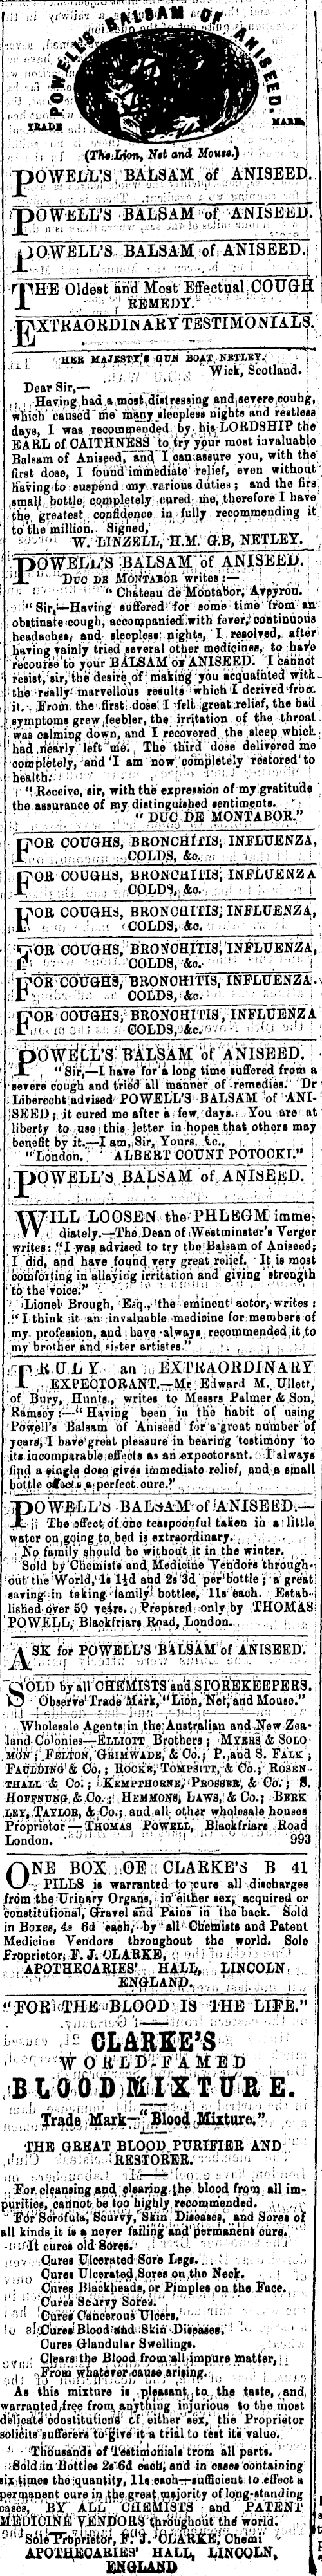 Papers Past Newspapers Colonist December 1879 Page 2 Advertisements Column 3